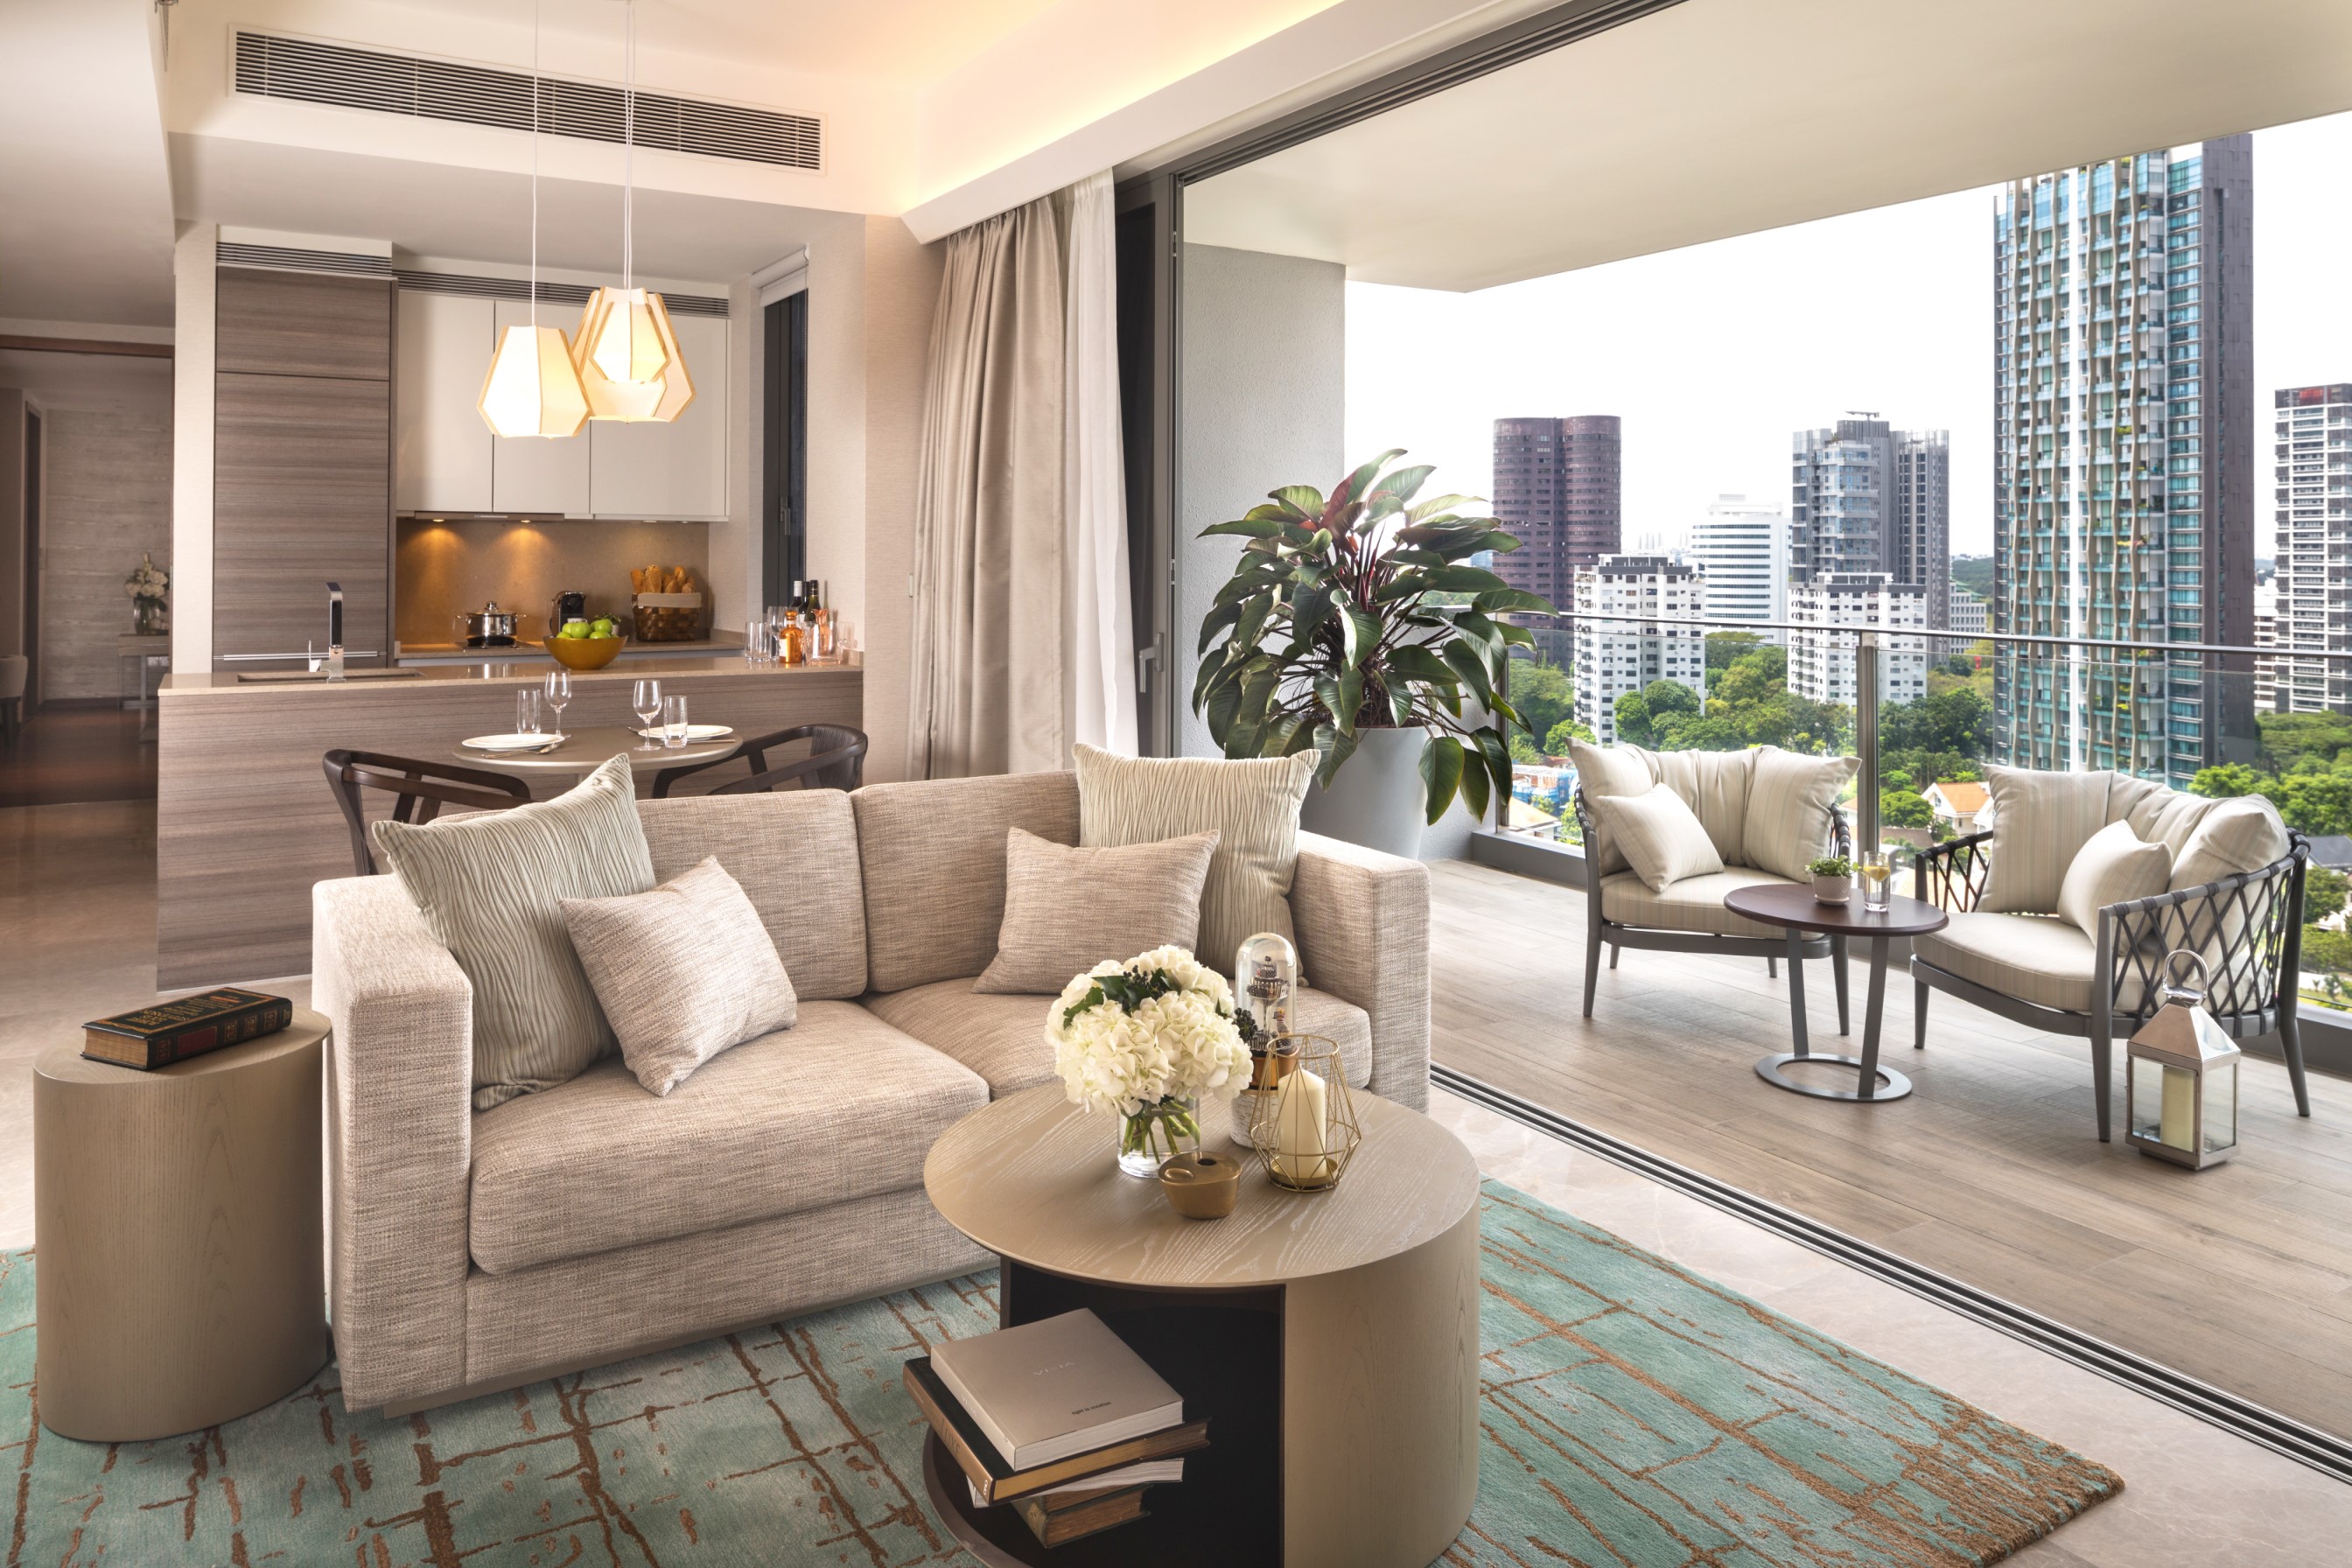 Spacious living room overlooking the city